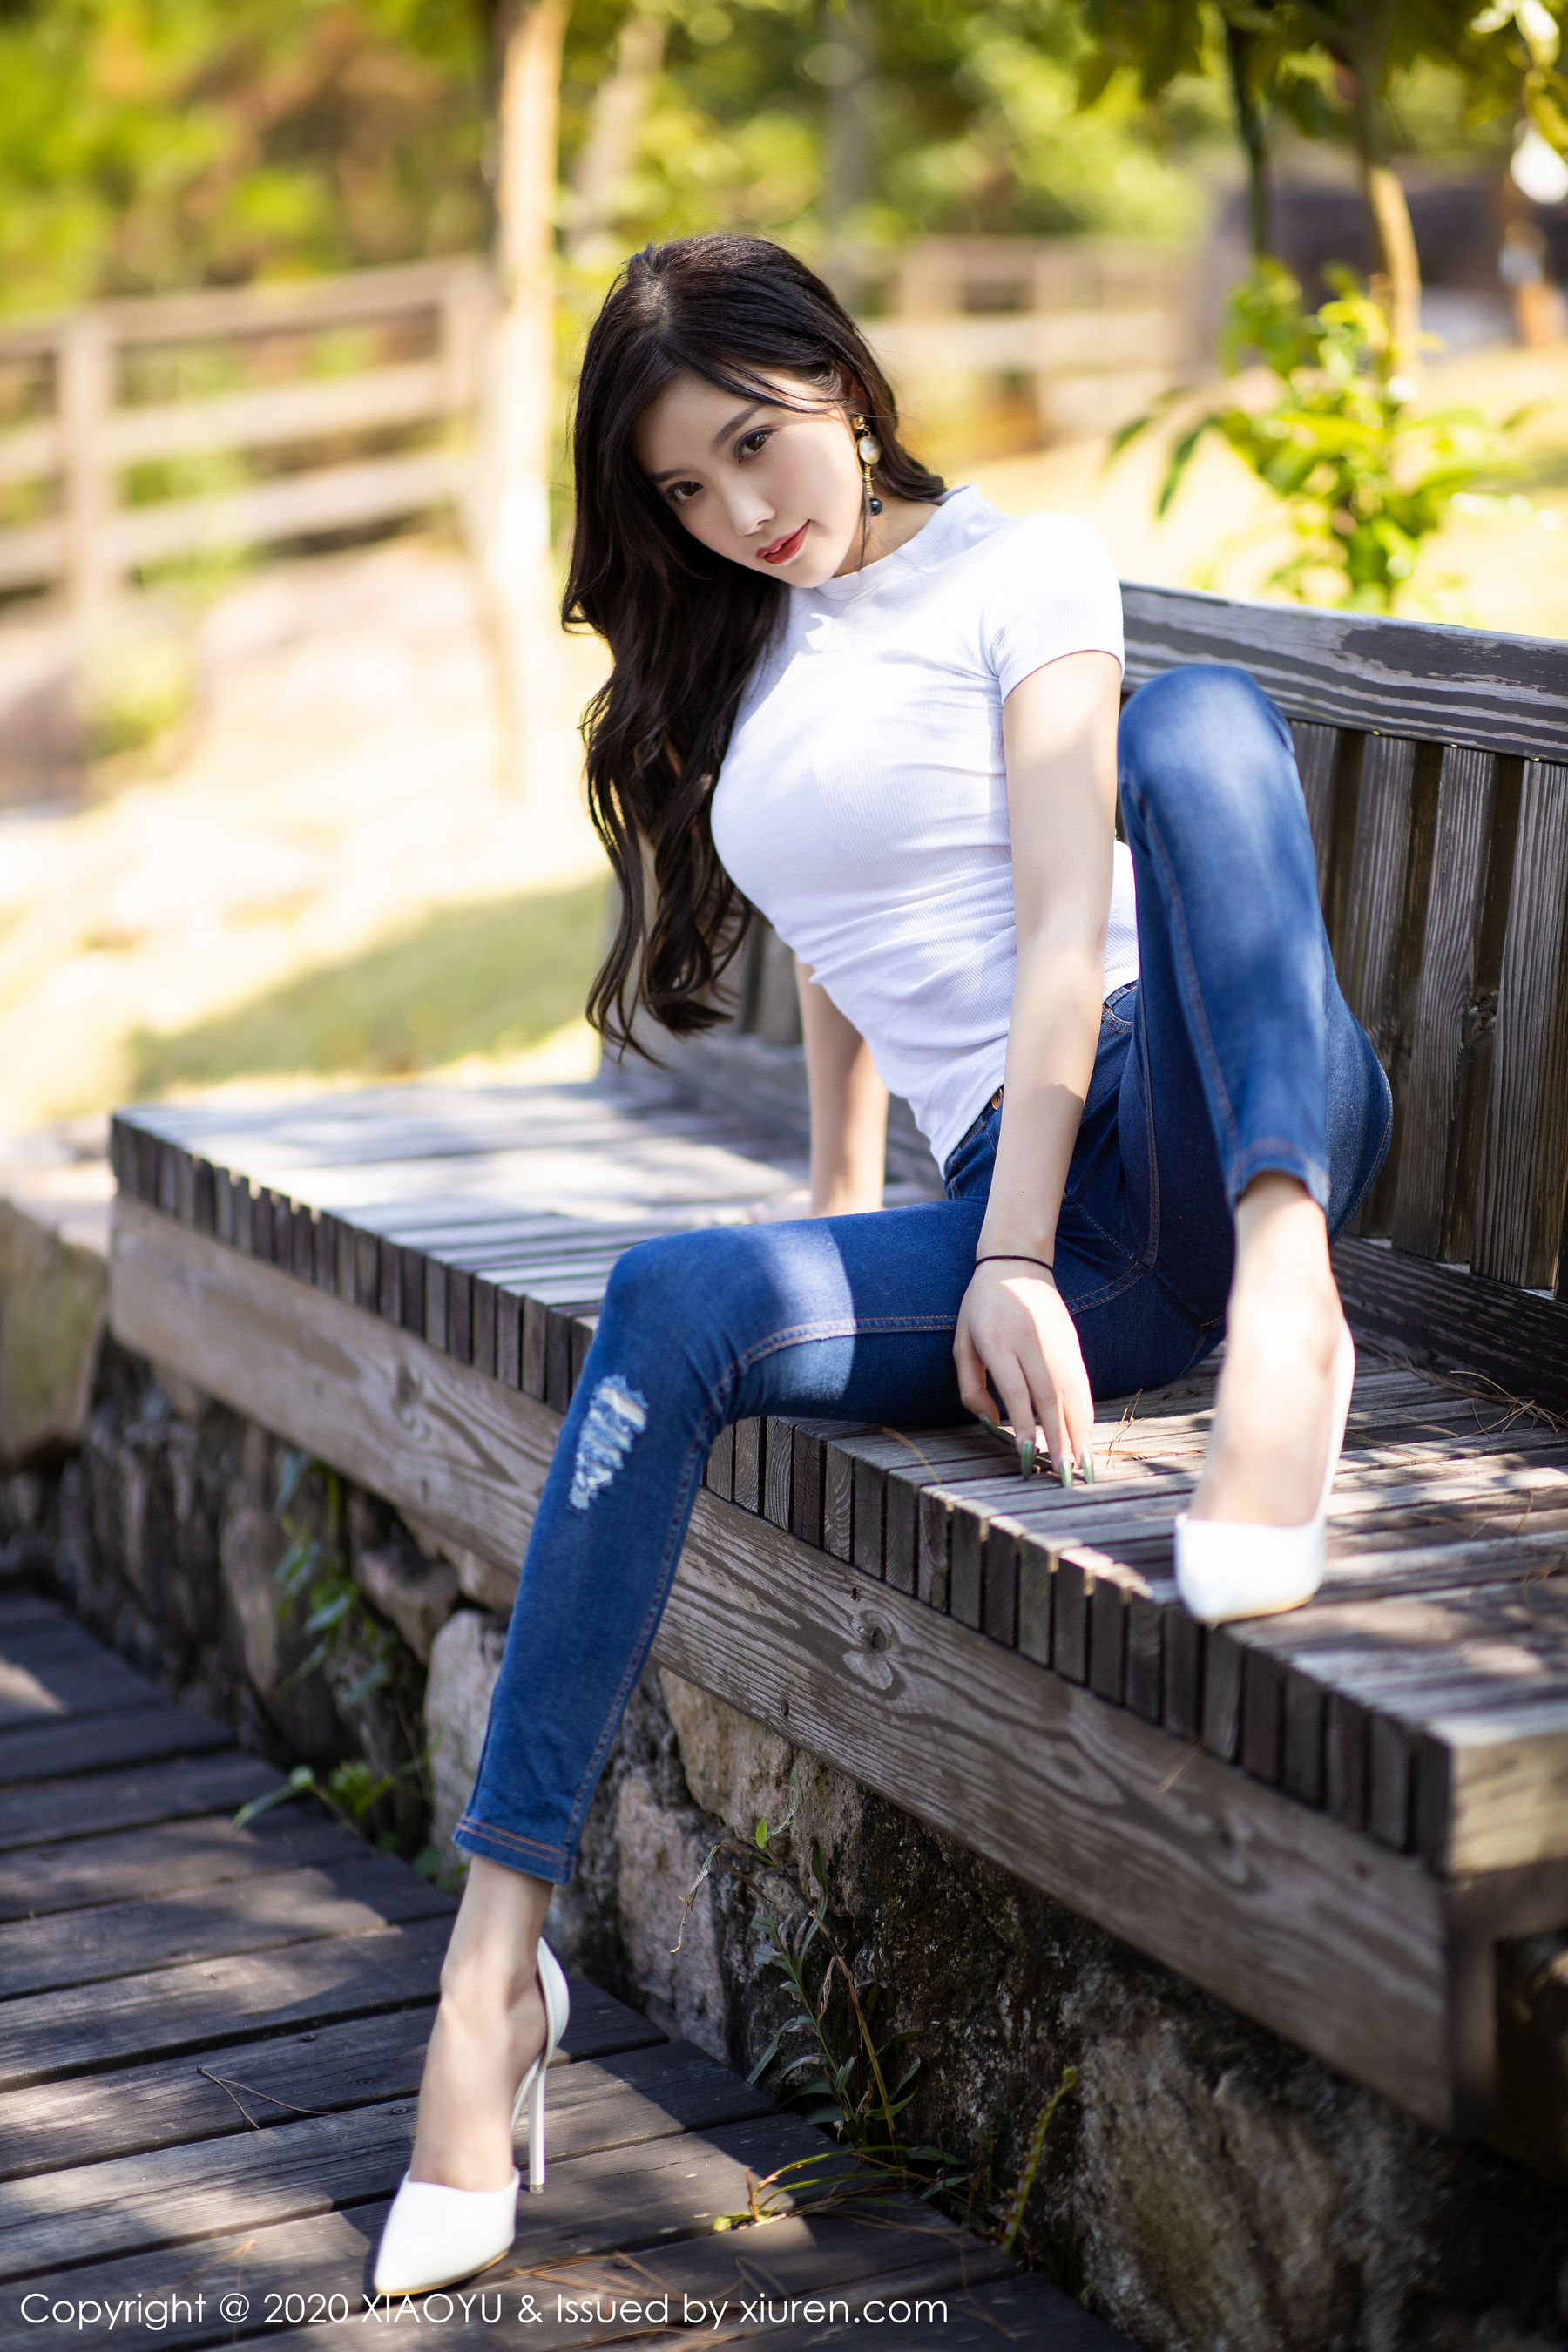 [LangkhaIxia XIAOYU] Vol.300 Yang Chenchen Sugar “The best body under jeans” photo collection